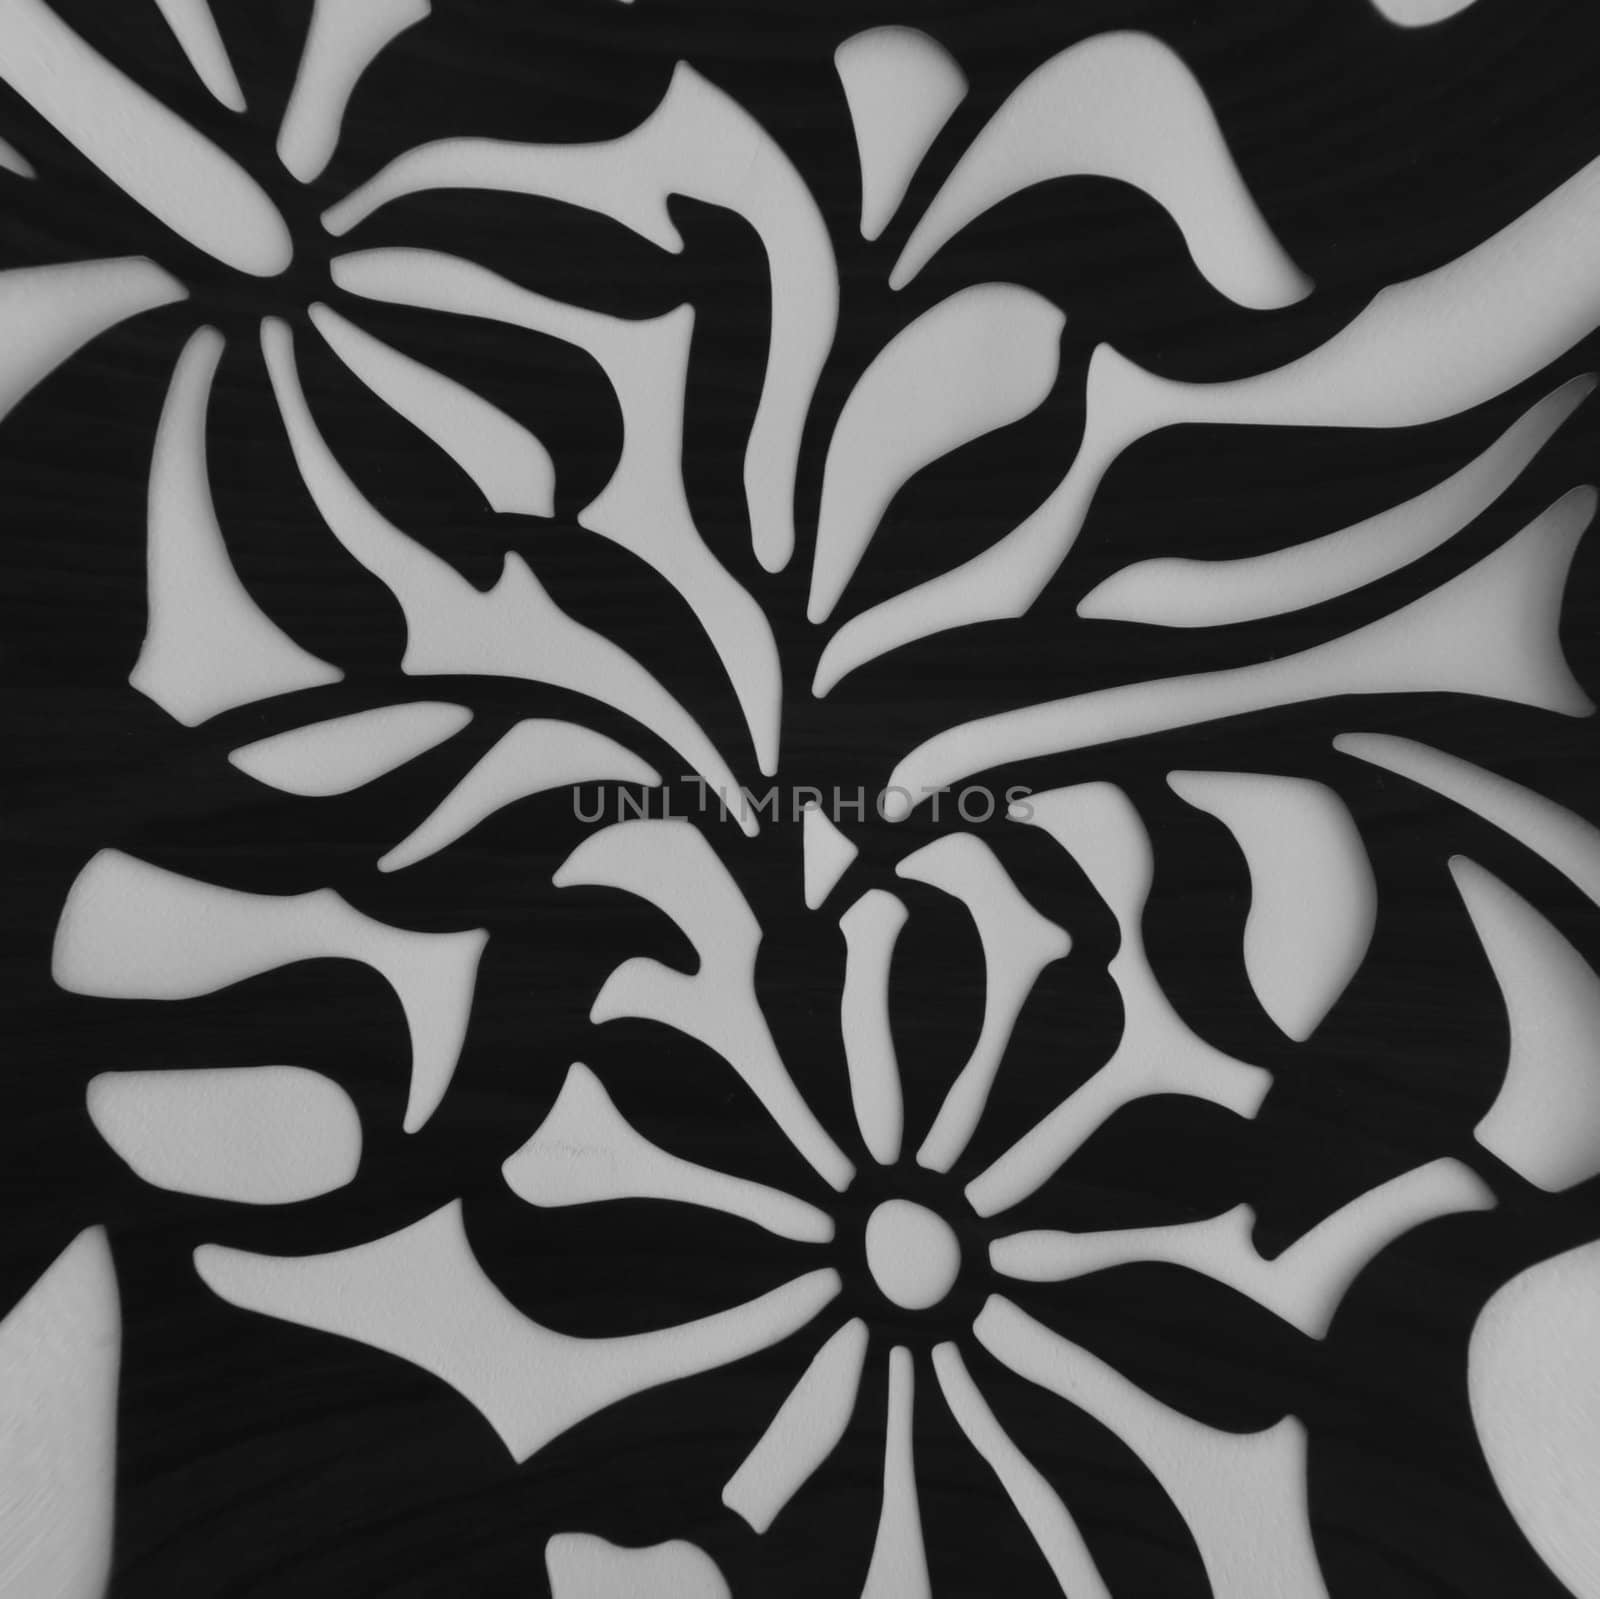 Vintage floral pattern motif. Nature background distorted flowers black and white.